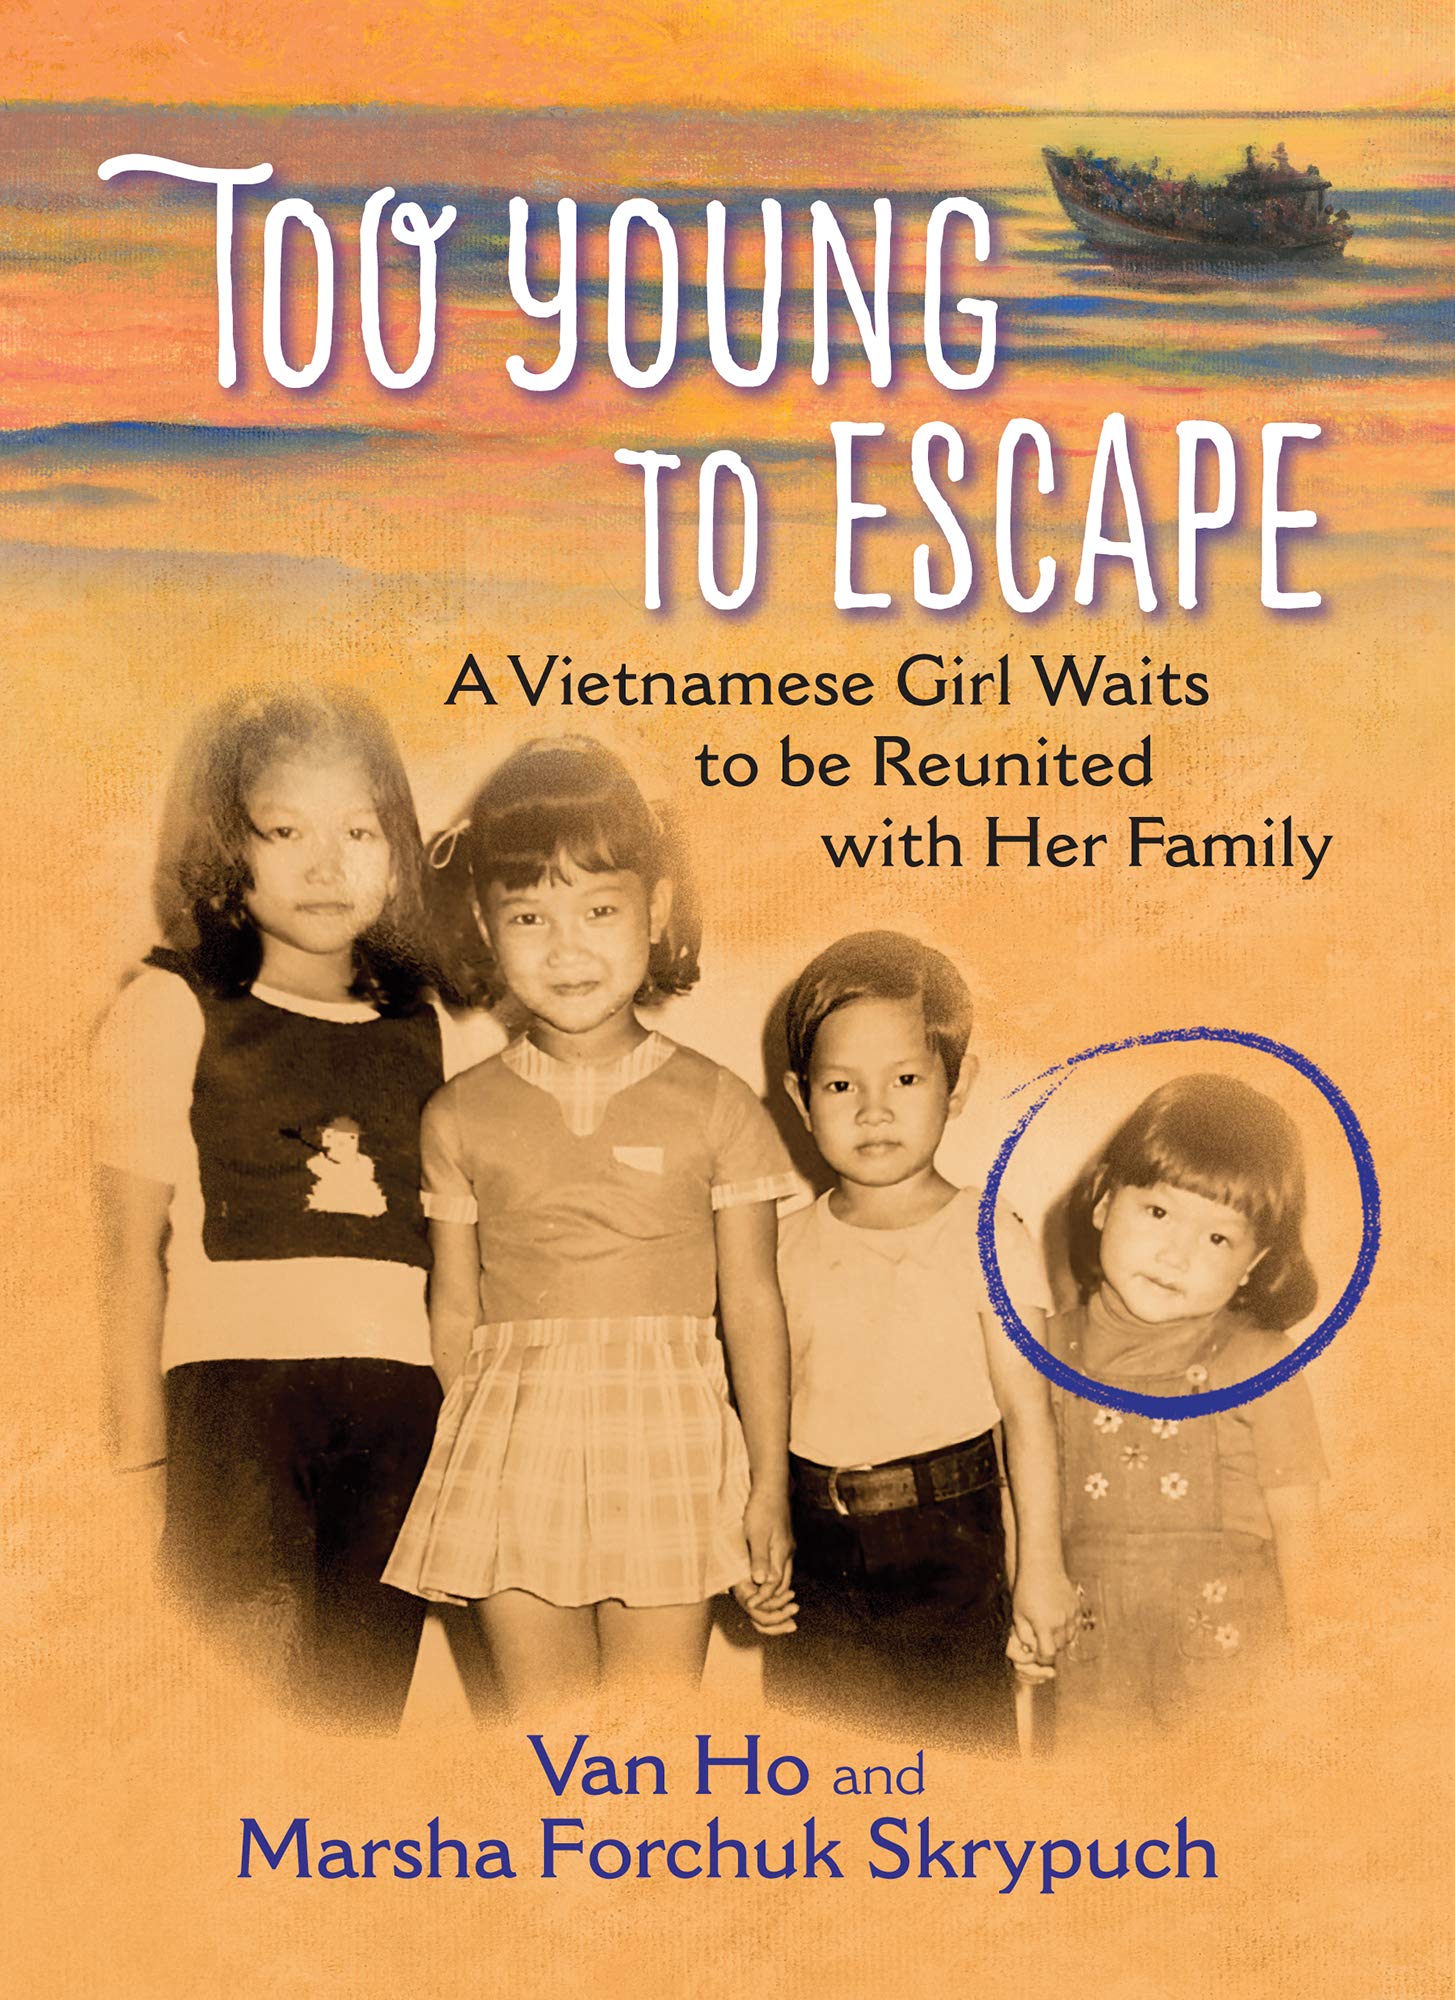 Too young to escape: a Vietnamese girl waits to be reunited with her family by Van Ho